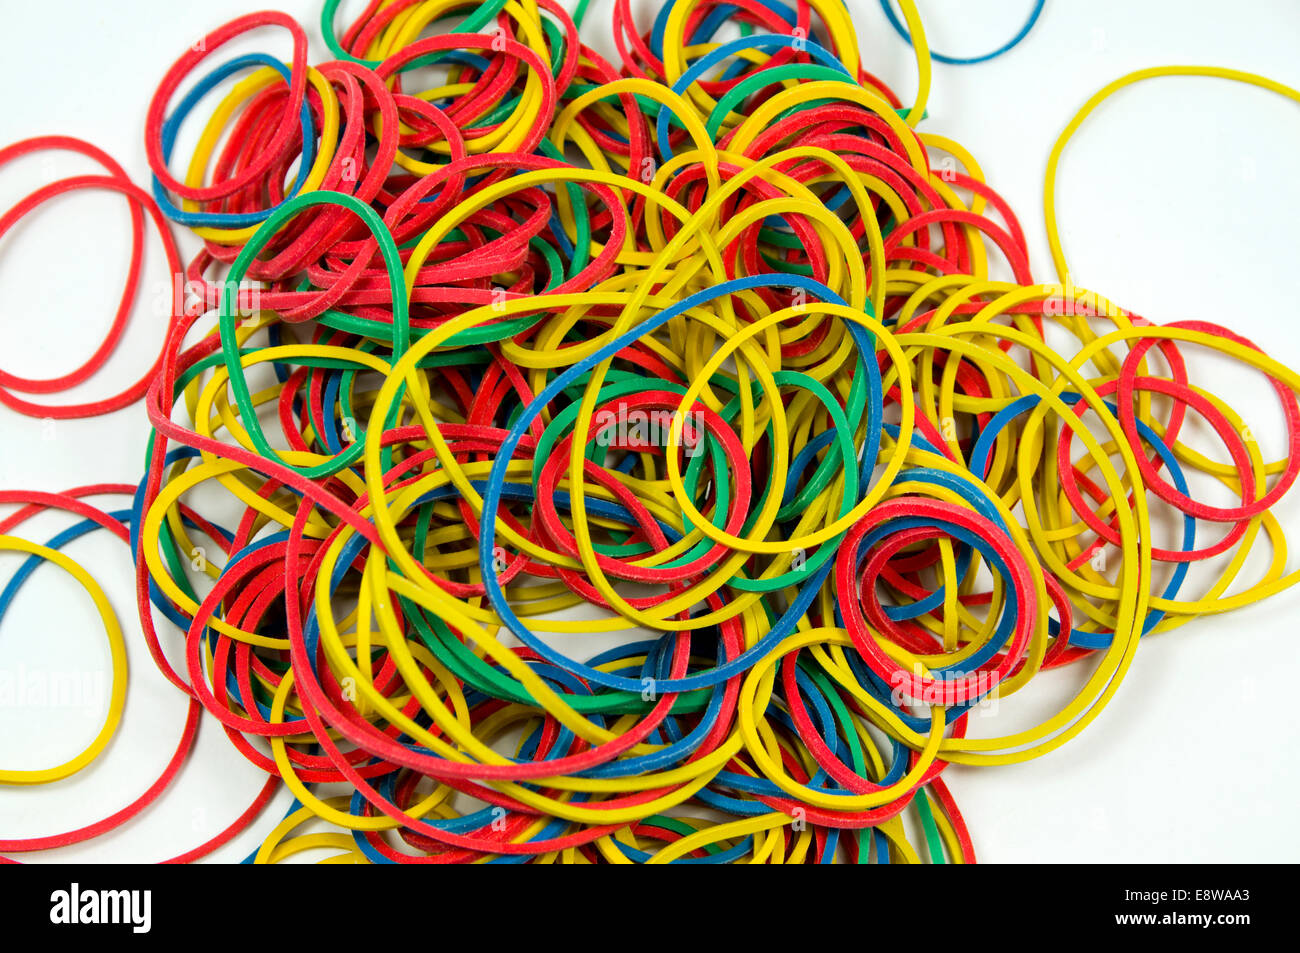 Pile of multi coloured rubber bands Stock Photo